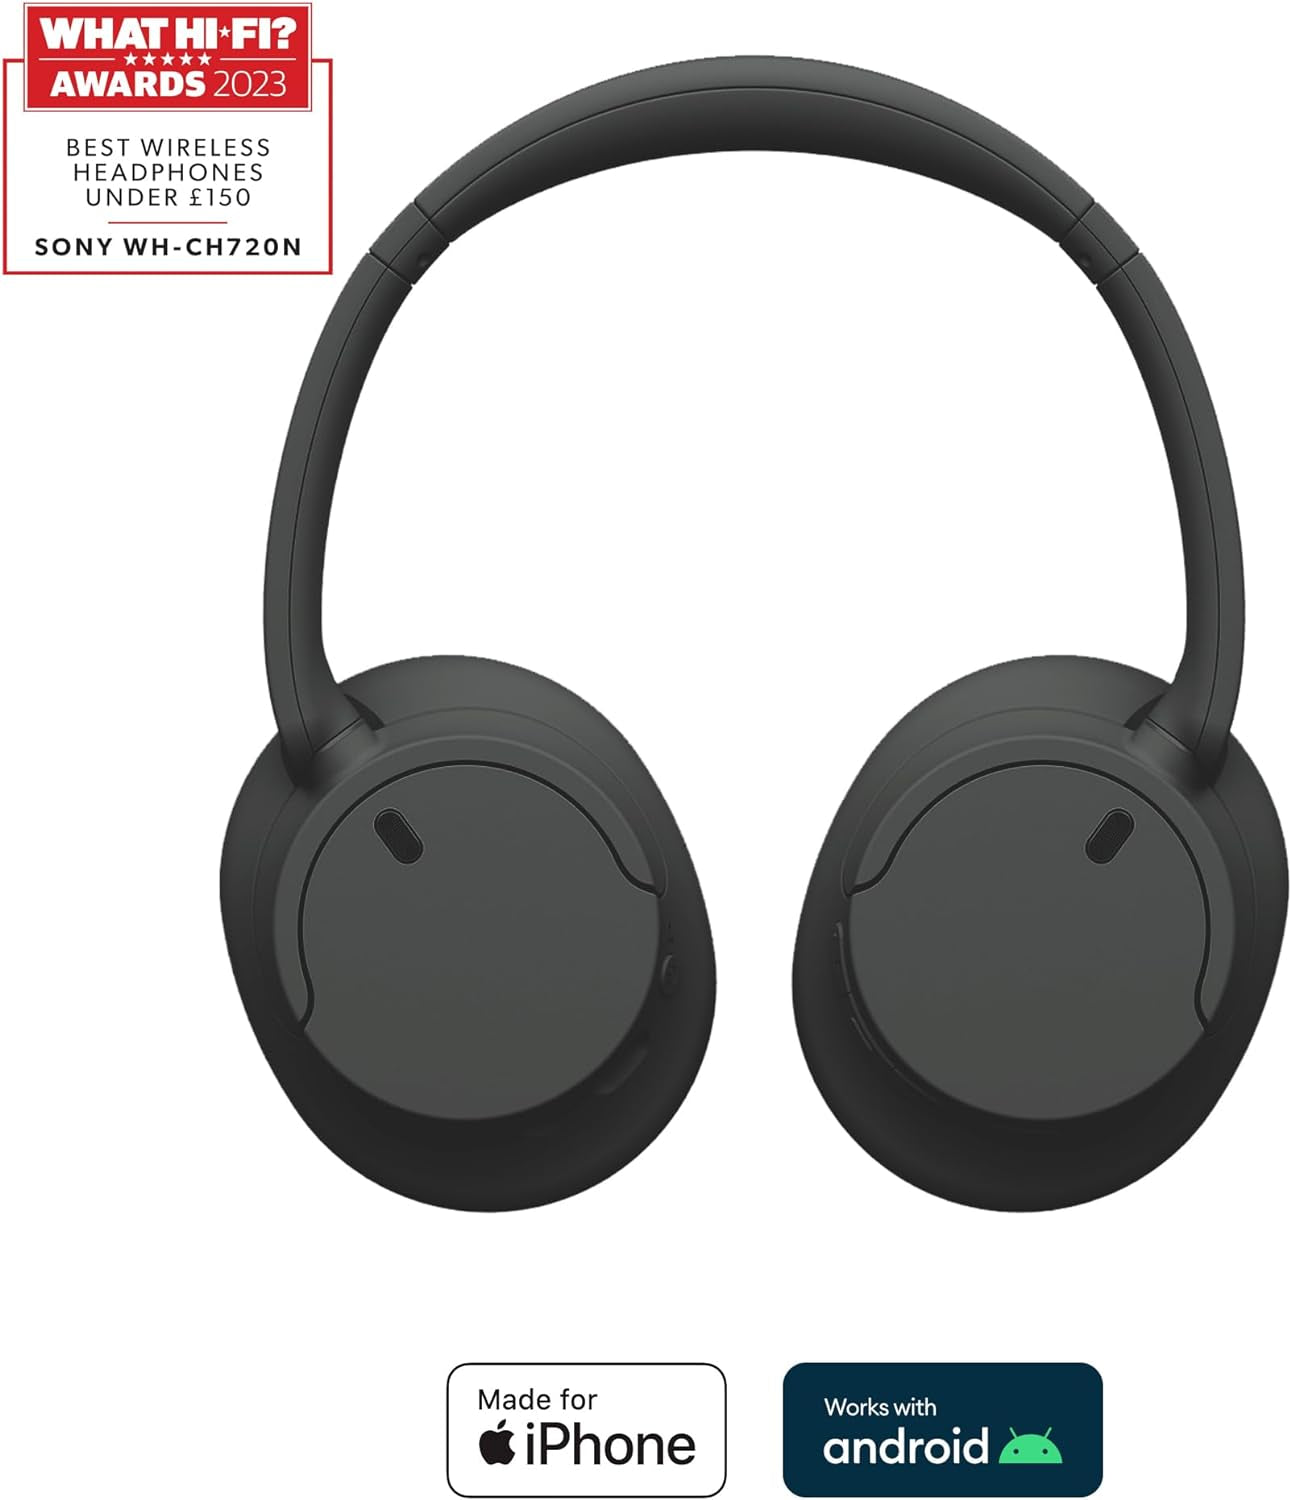 WH-CH720N Noise Cancelling Wireless Bluetooth Headphones - up to 35 Hours Battery Life and Quick Charge - Black